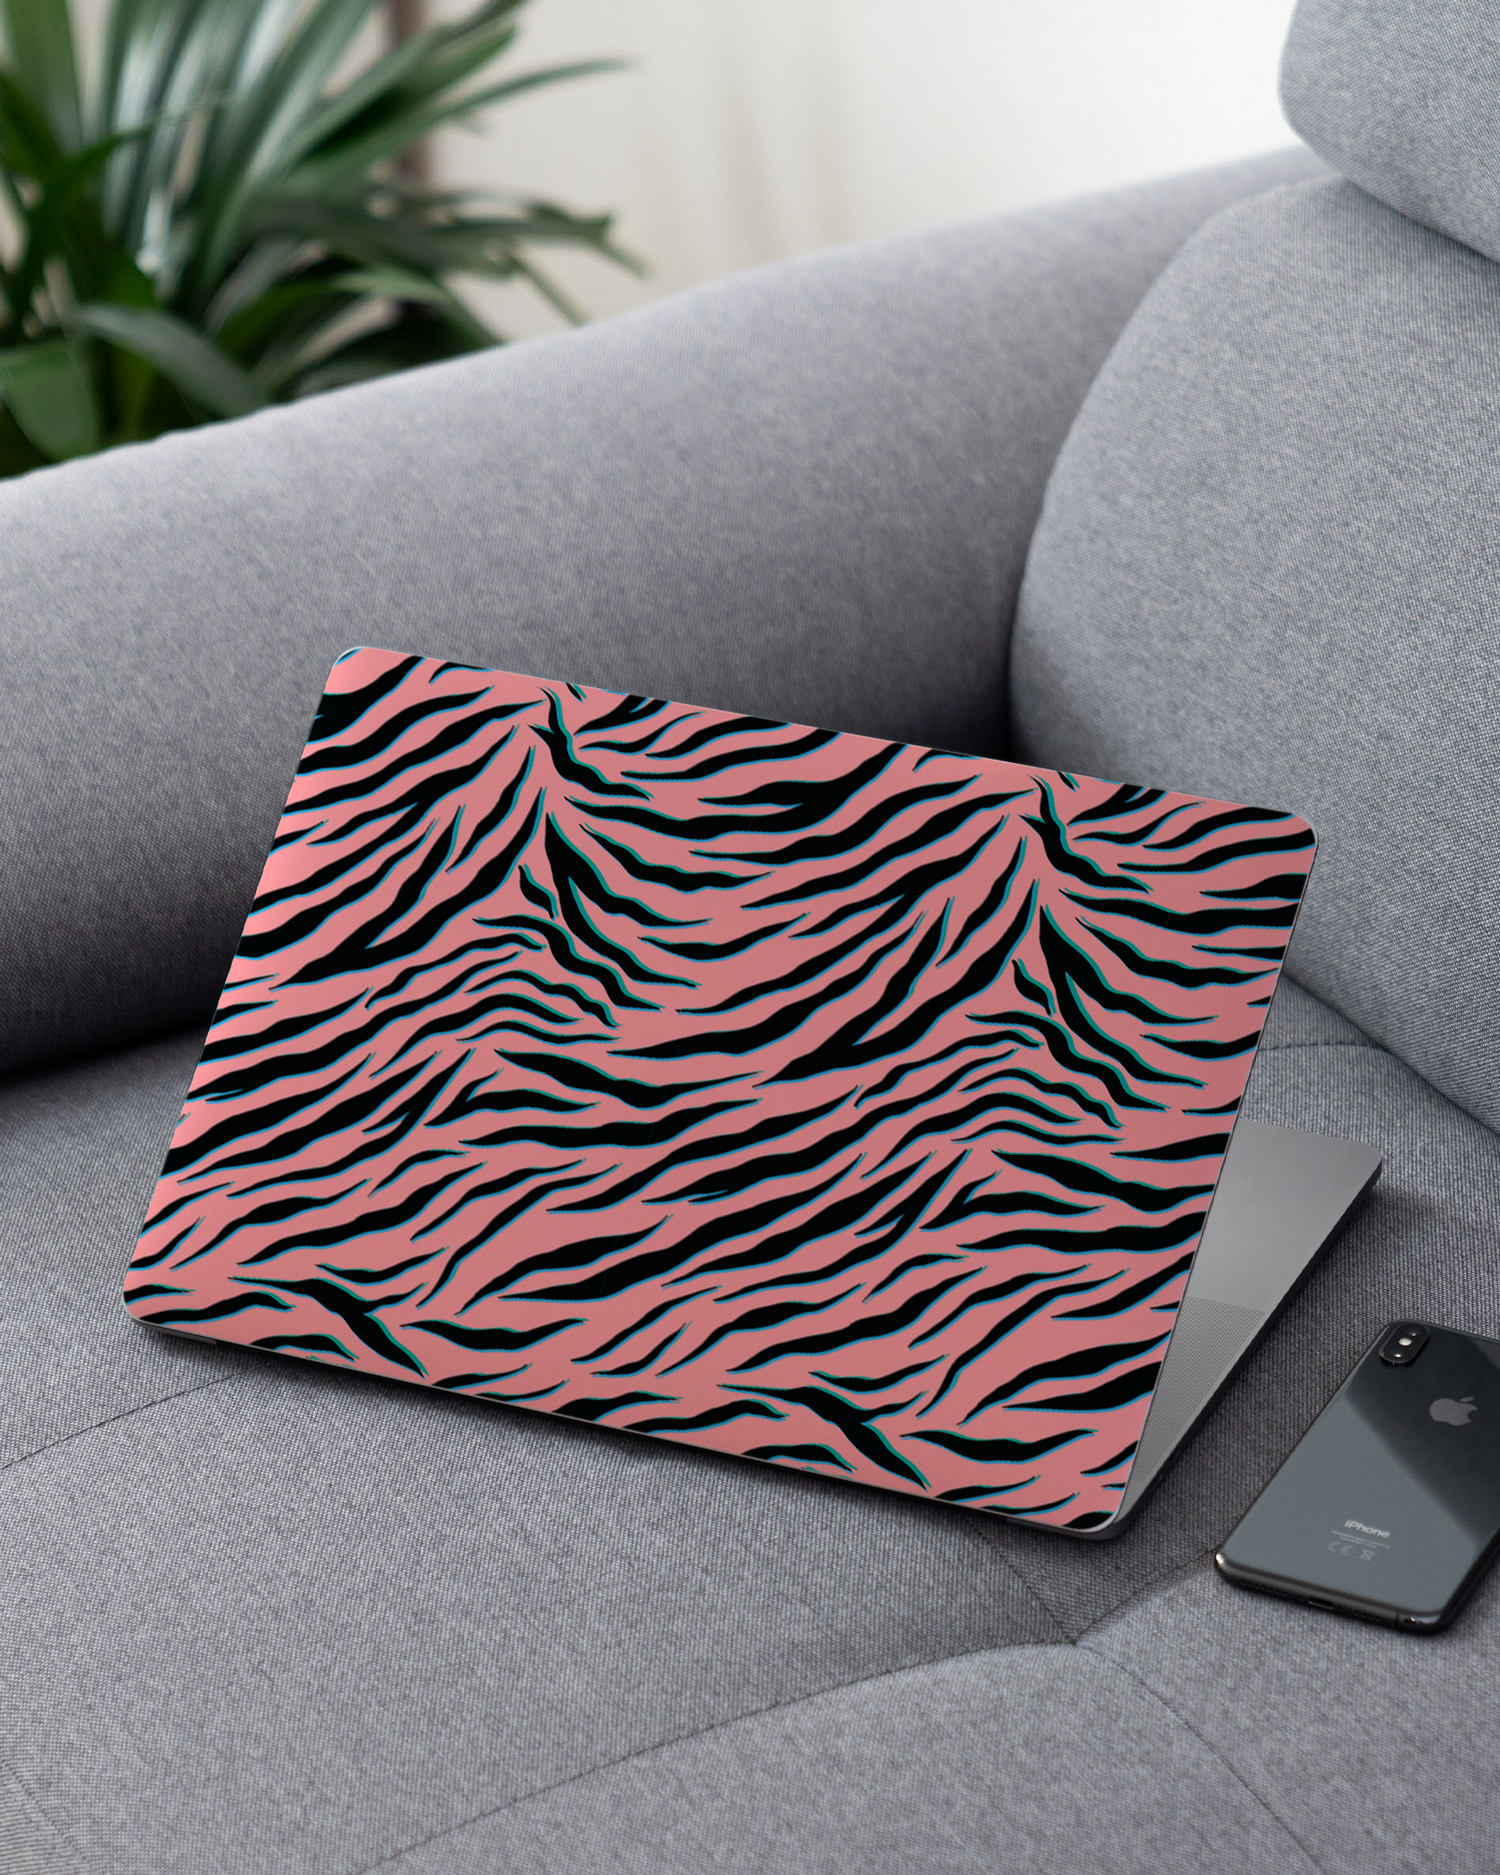 Pink Zebra Laptop Skin for 13 inch Apple MacBooks on a couch